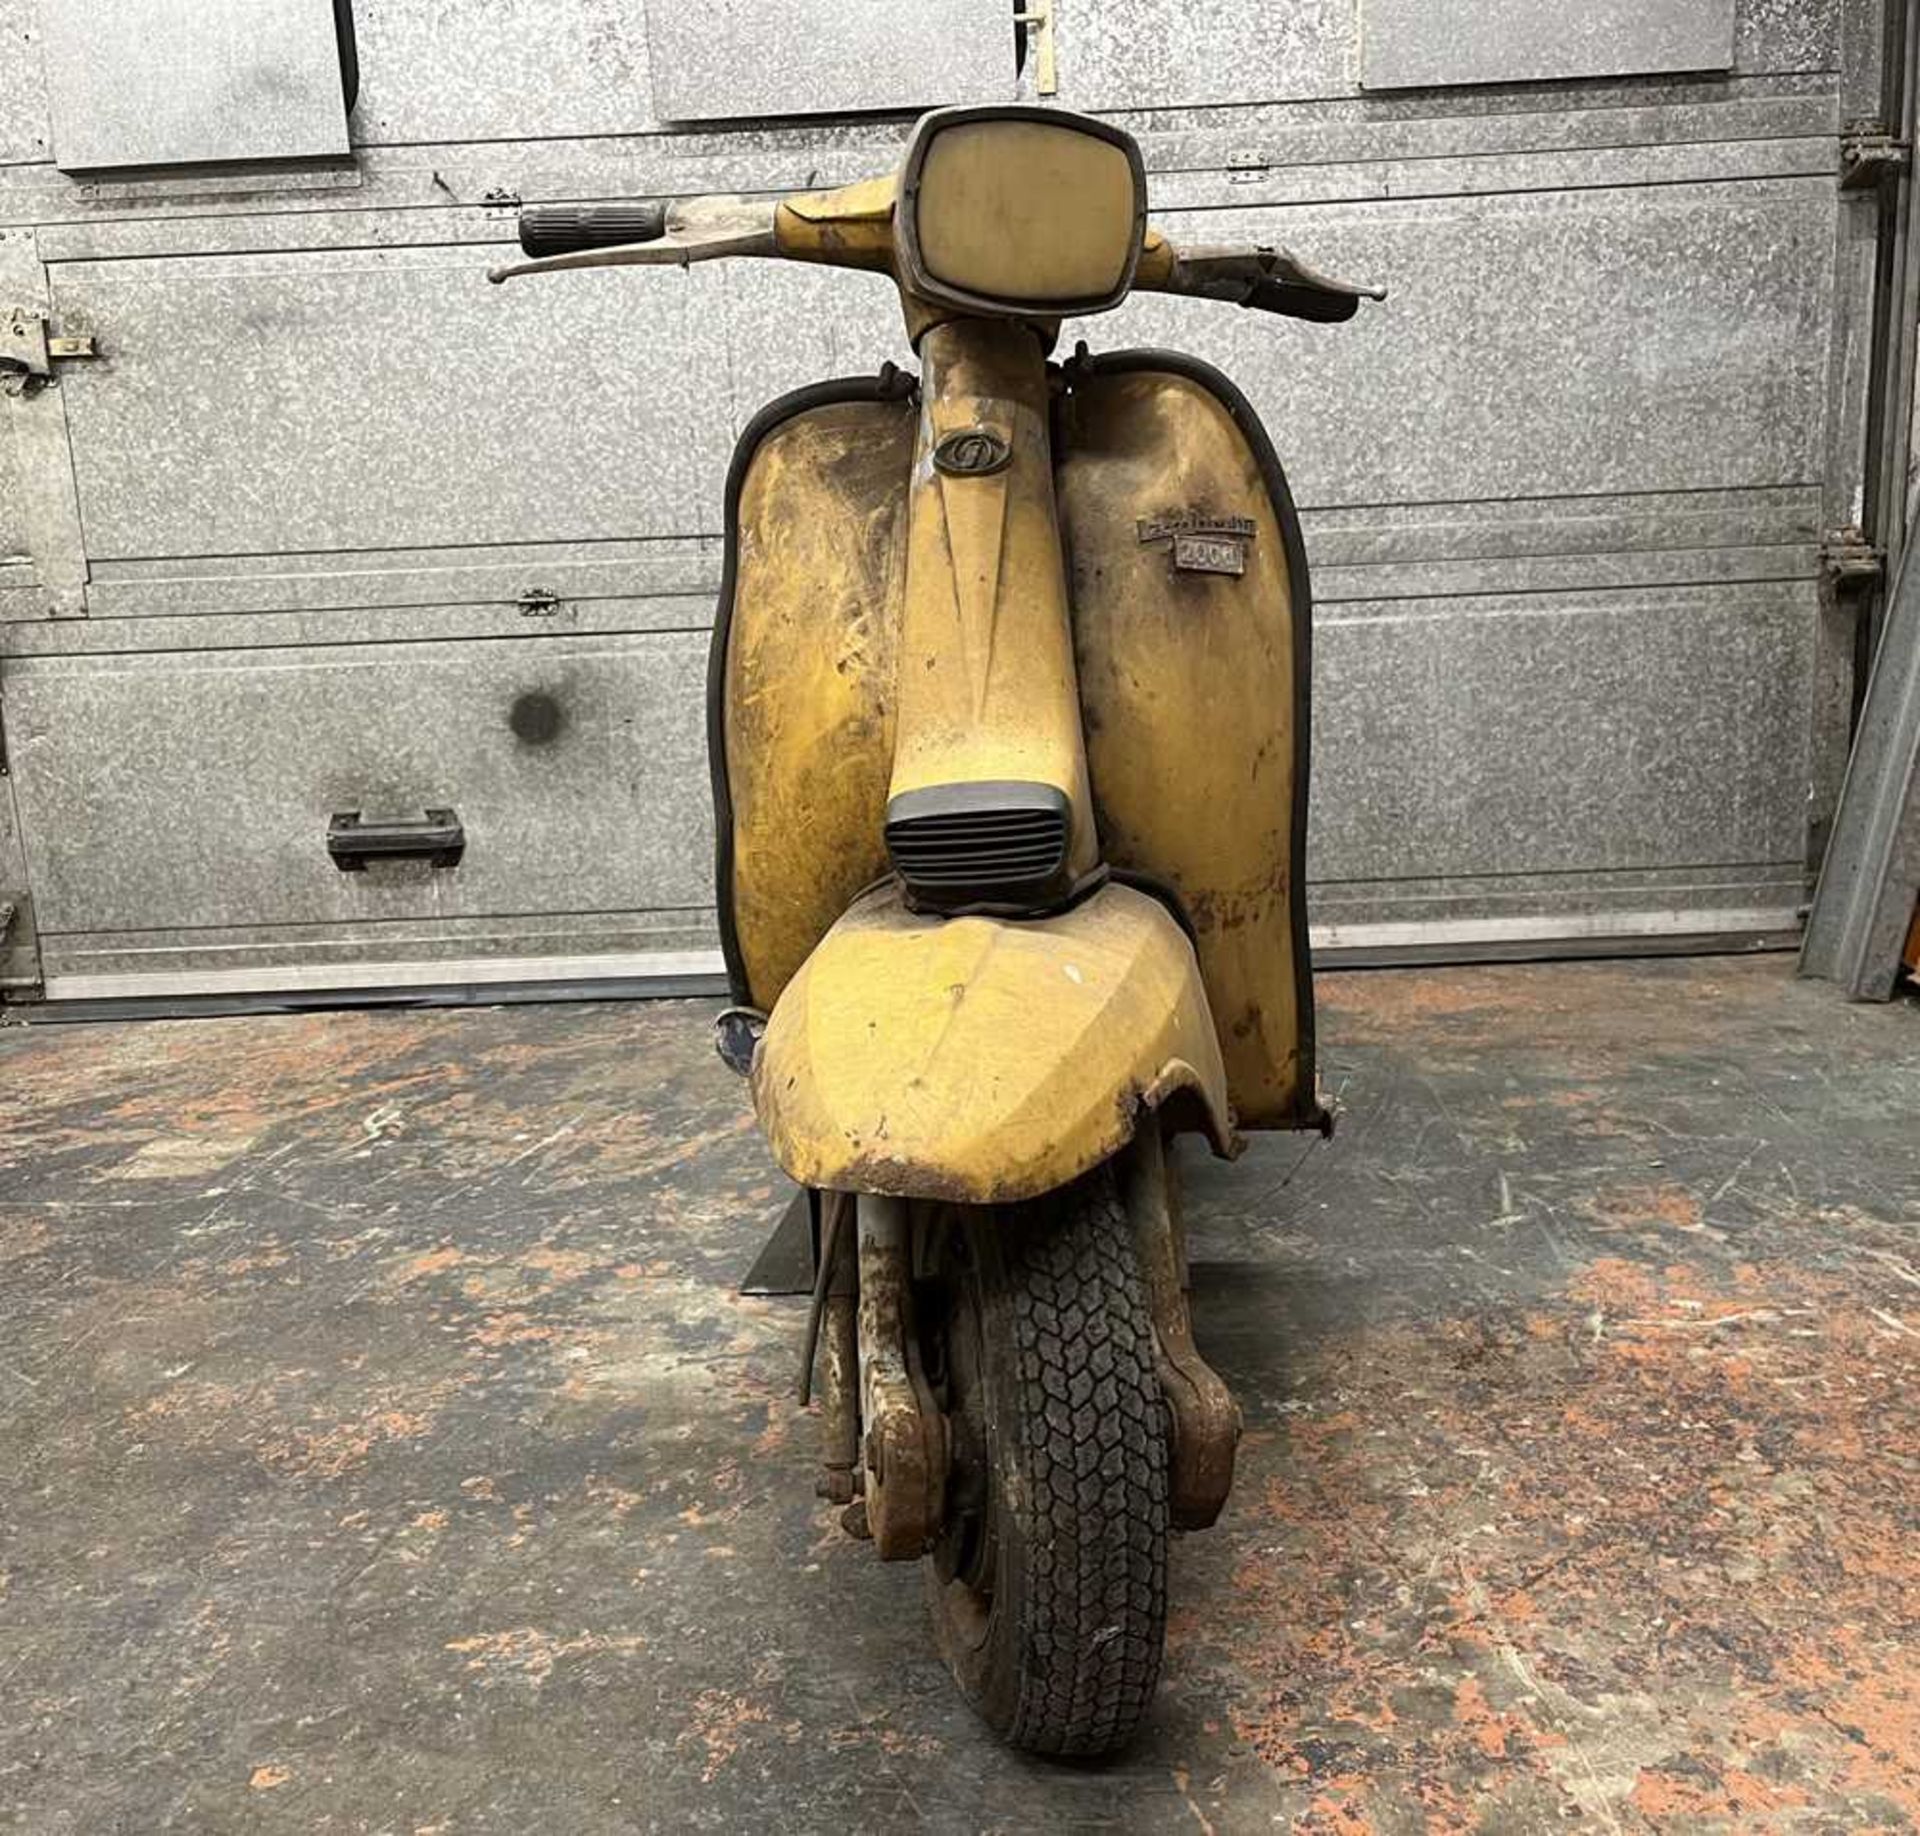 1971 Lambretta DL200 Electronic Extraordinary opportunity - Image 6 of 67